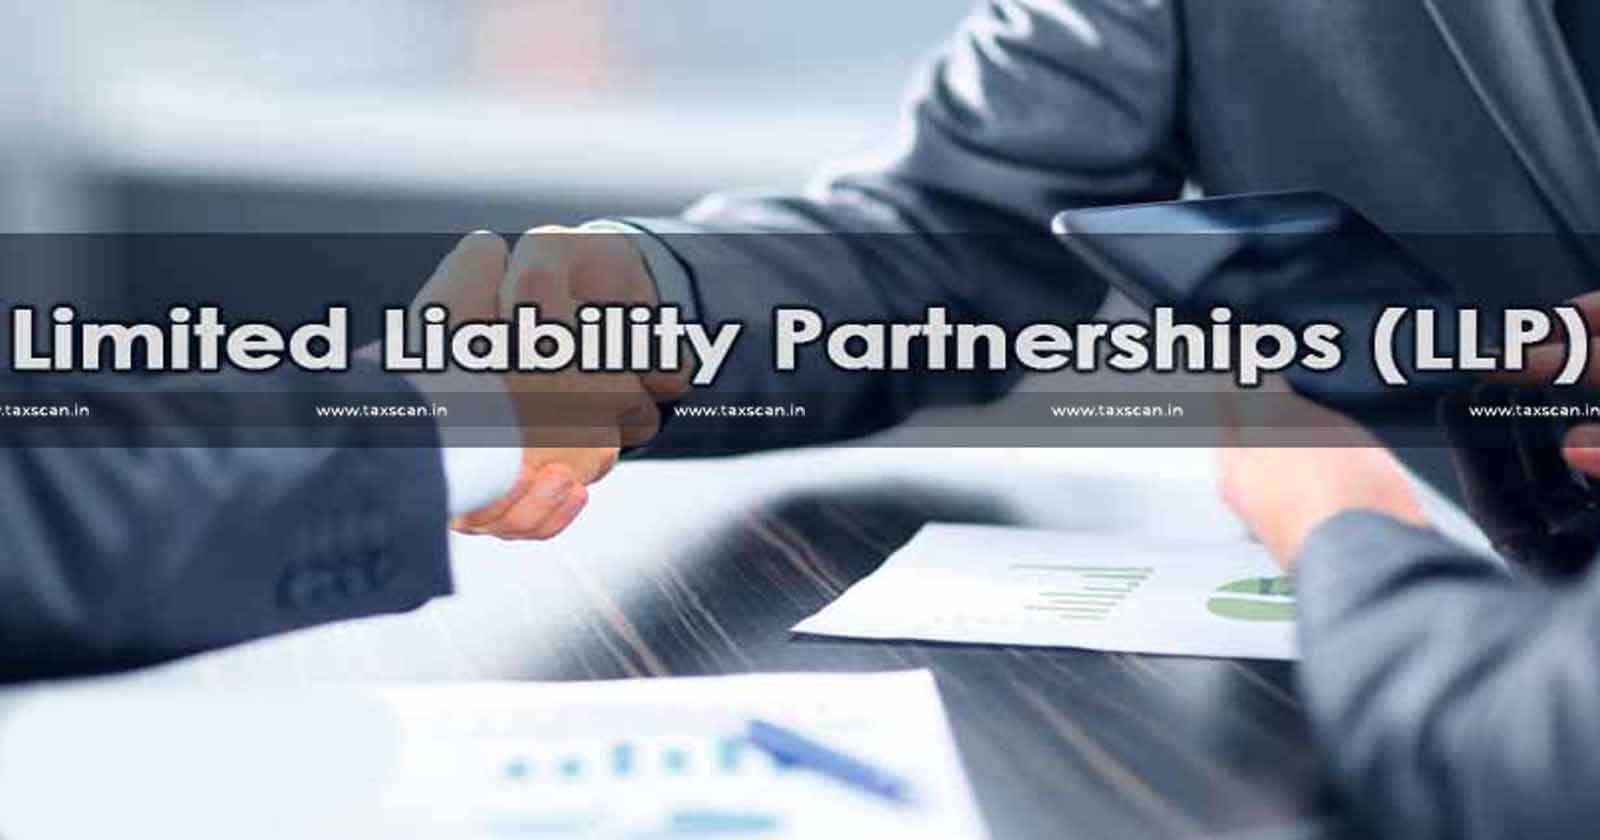 Limited Liability Partnerships - LLP - Ministry - Ministry Imposes stricter compliance for LLPs - stricter compliance - Imposes stricter compliance - TAXSCAN